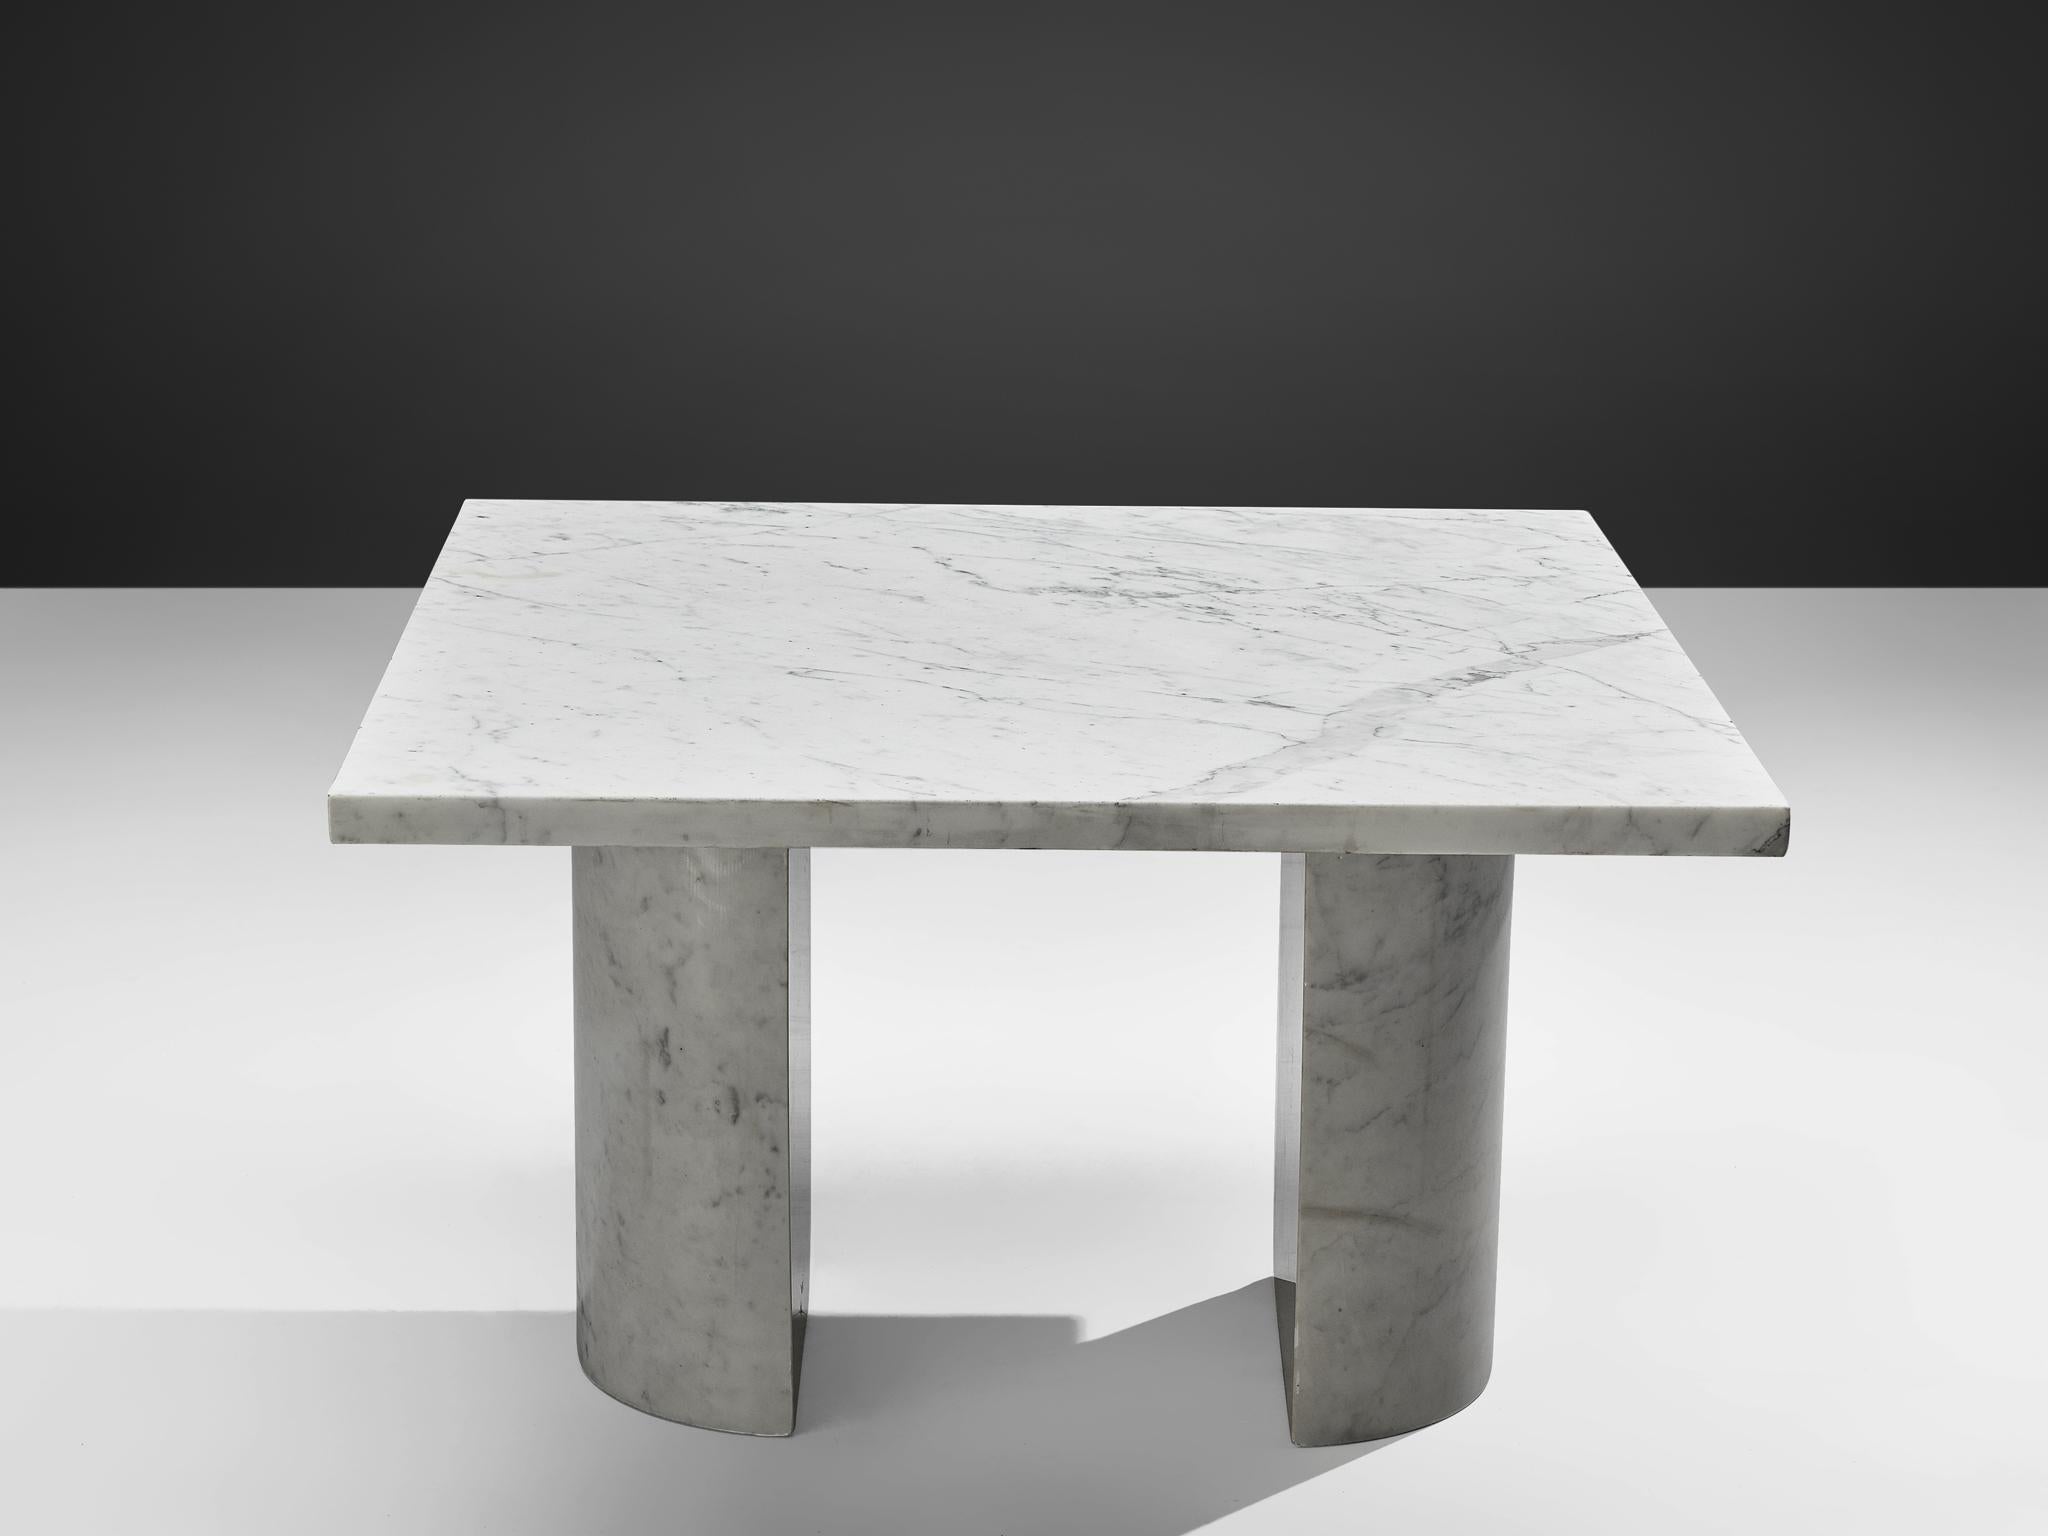 Coffee table, marble, Italy, 1970s.

This cocktail table features a rectangular shaped marble tabletop. The top is supported by two semi-circular columns. The aesthetics are archetypical for postmodern design, bearing references to architectural